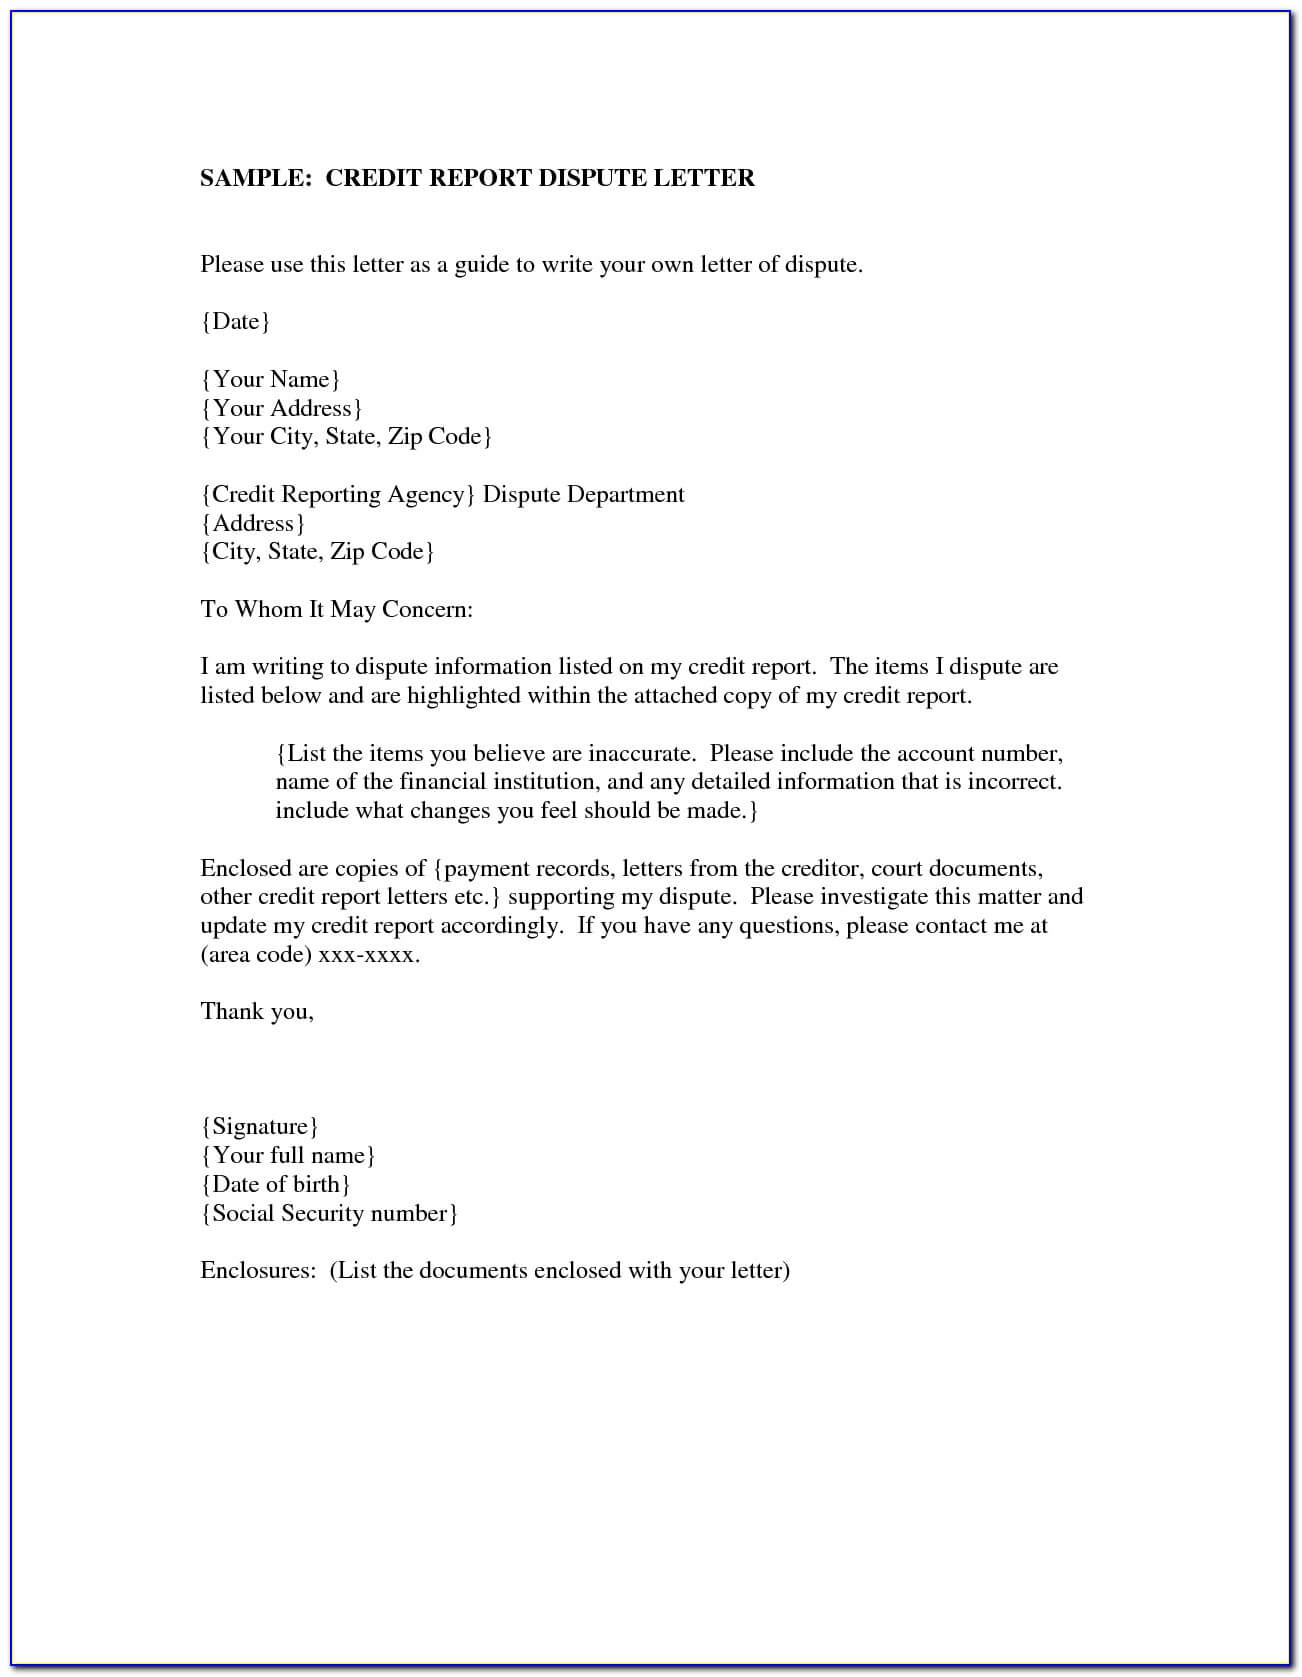 Dispute Credit Report Letter | | Best Business Template For With Regard To Credit Report Dispute Letter Template